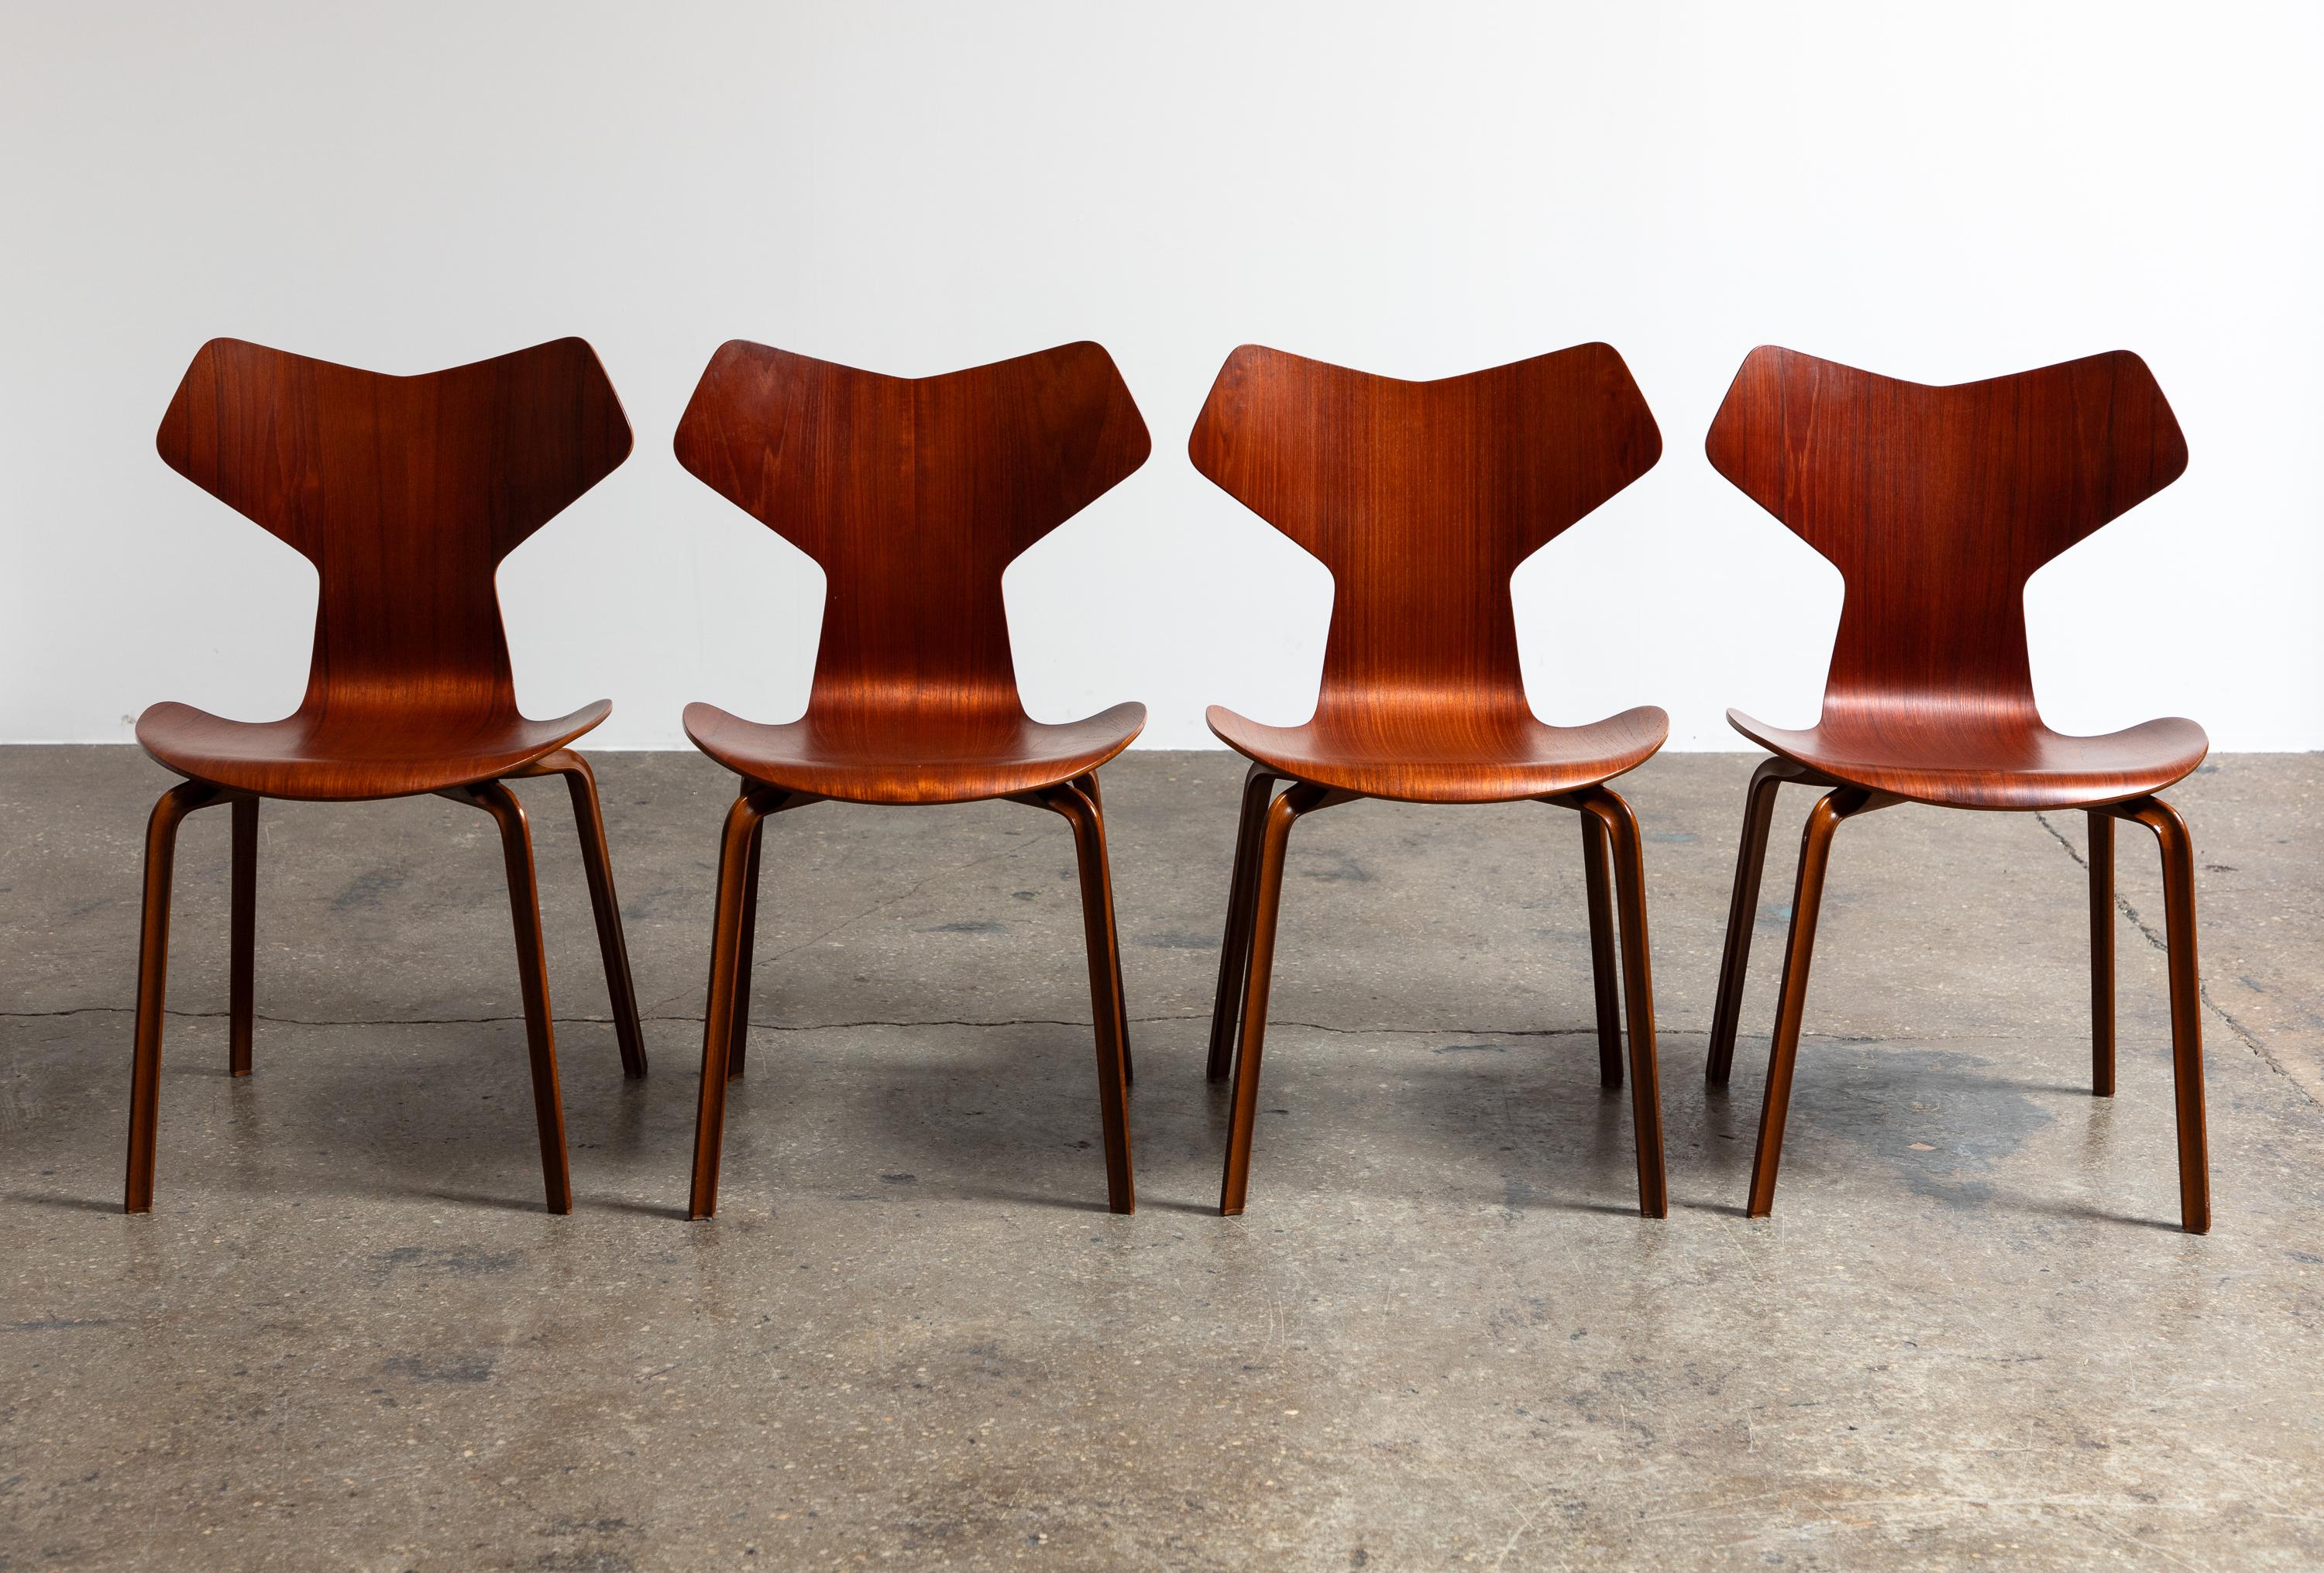 Stunning set of Grand Prix chairs designed by Arne Jacobsen for Fritz Hansen. Lightweight and comfortable, these chairs are in good vintage condition with beautiful warm teak wood selection throughout. Chairs have had very little prior use and their